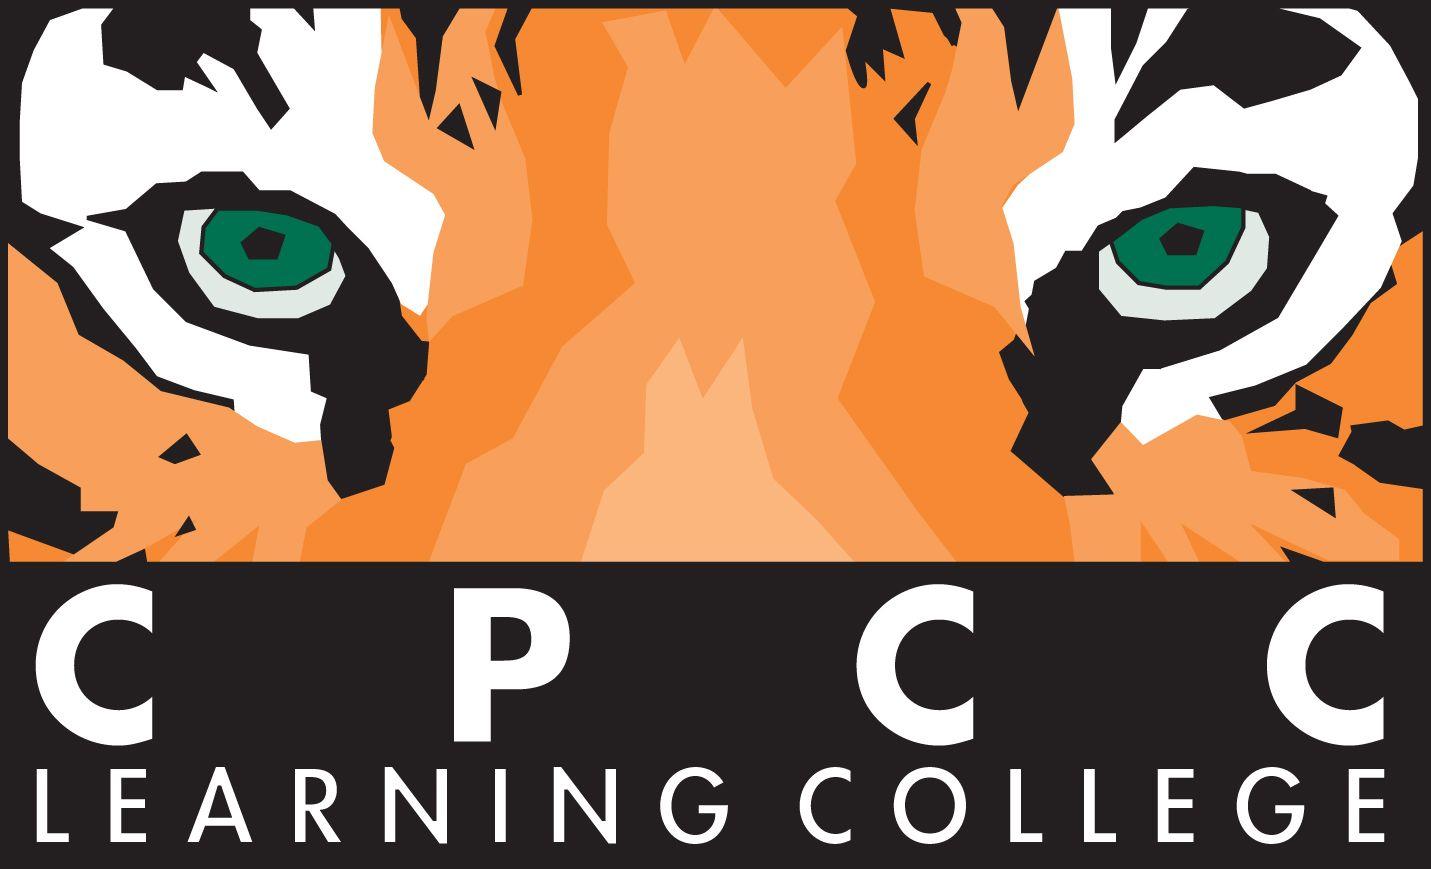 LC Tigers Logo - Welcome to CPCC.a Learning College